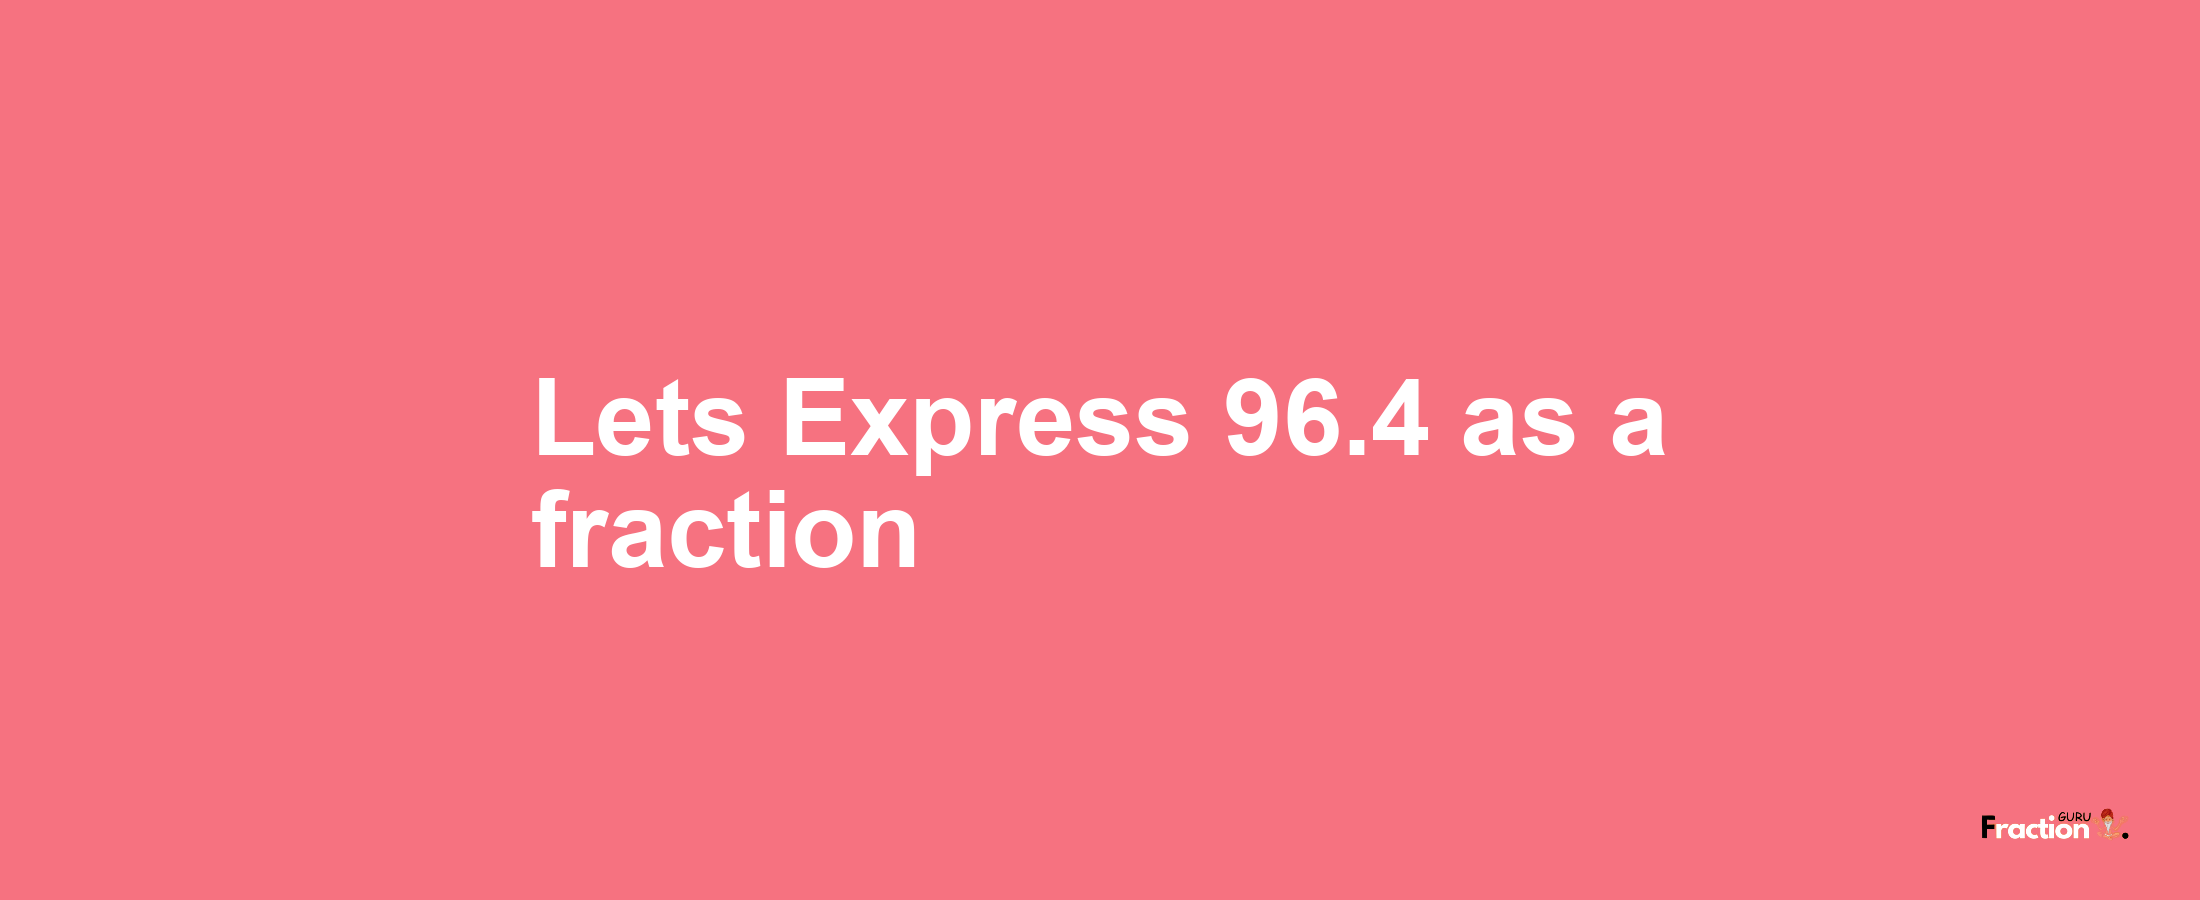 Lets Express 96.4 as afraction